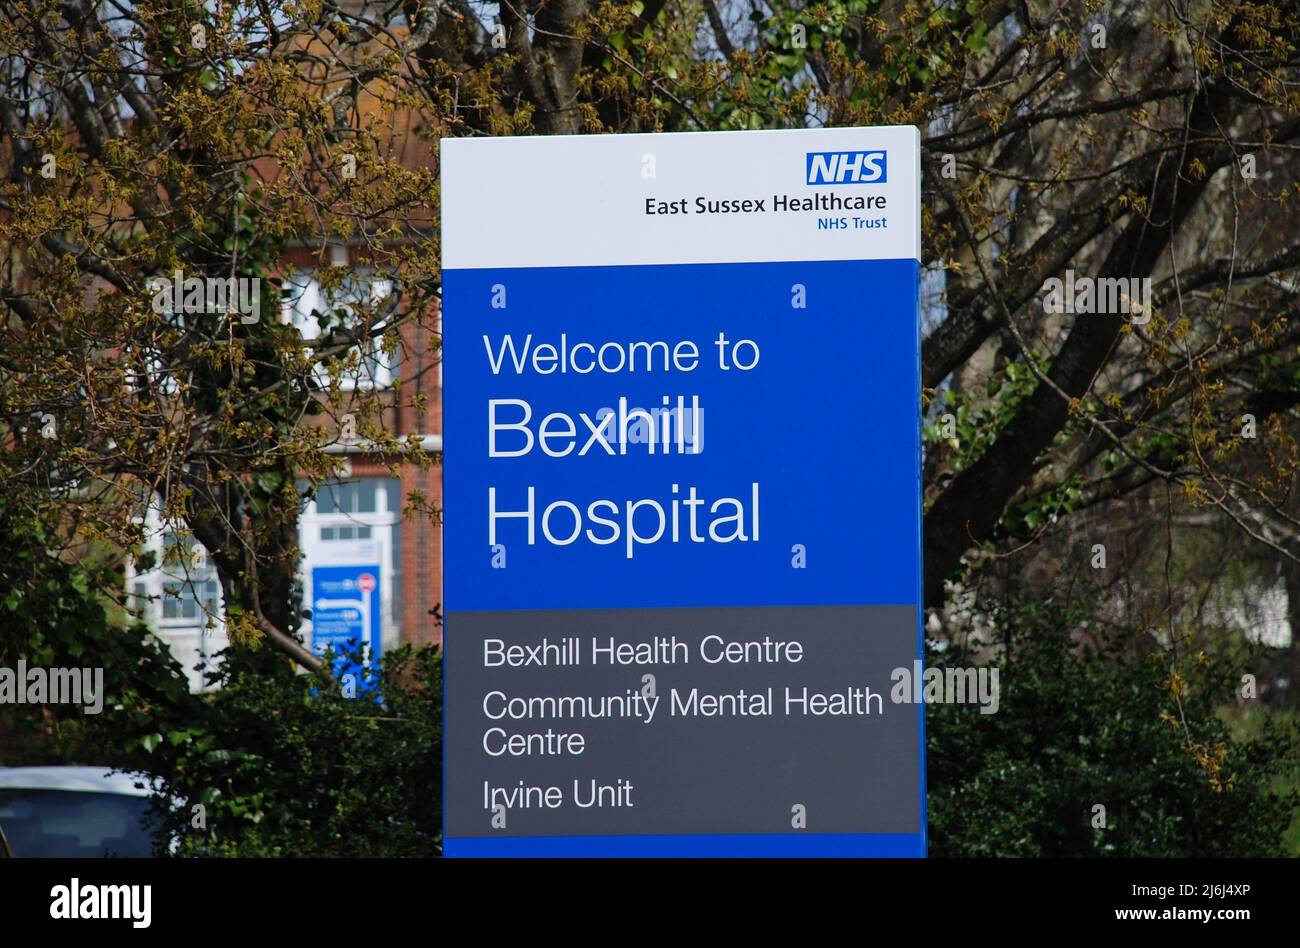 Signage outside the entrance to Bexhill Hospital in East Sussex, England on April 12, 2022. Opened in 1933, it became part of the National Health Service in 1948. Stock Photo